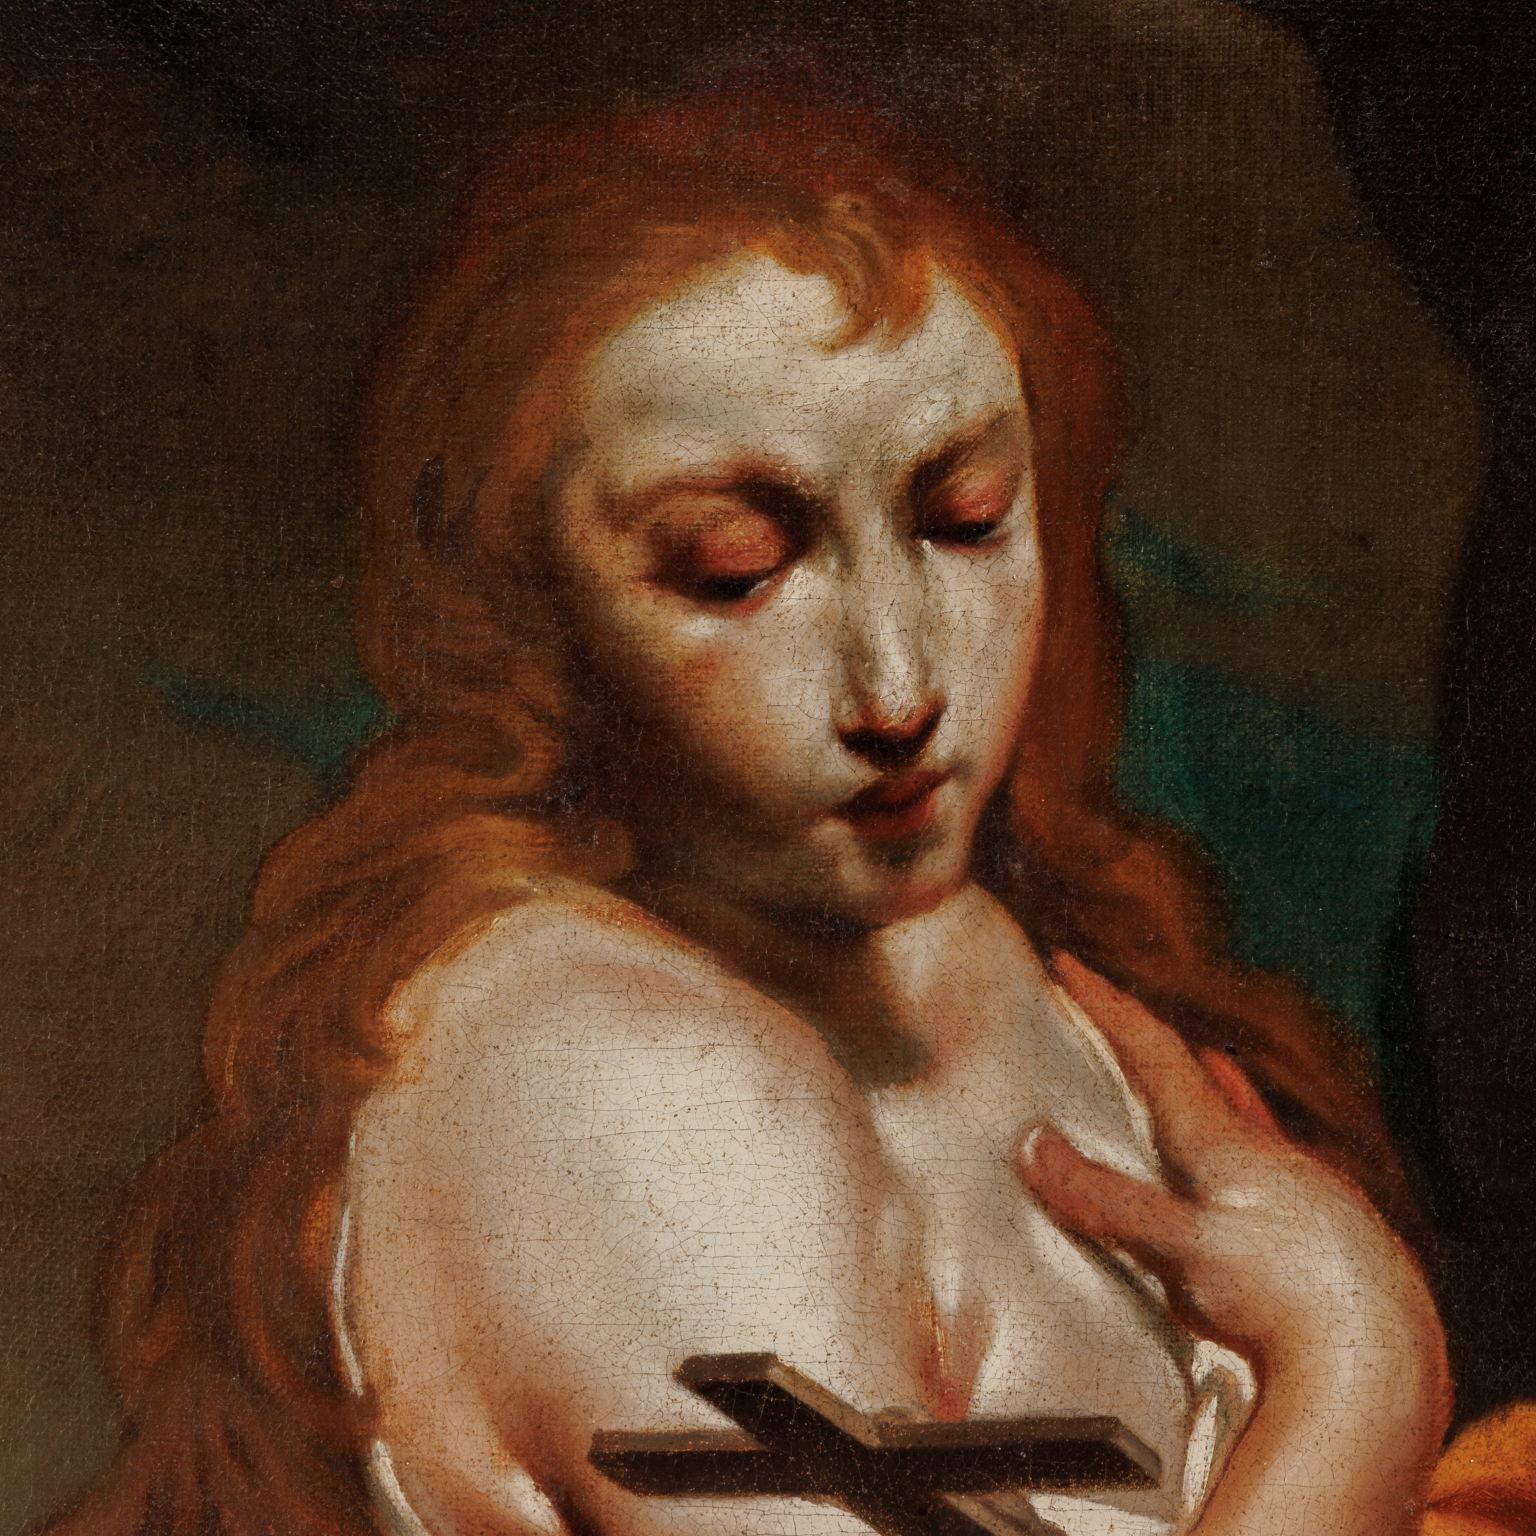 Penitent Magdalene, c. 1750. - Painting by Giuseppe Maria Crespi, called Lo Spagnuolo